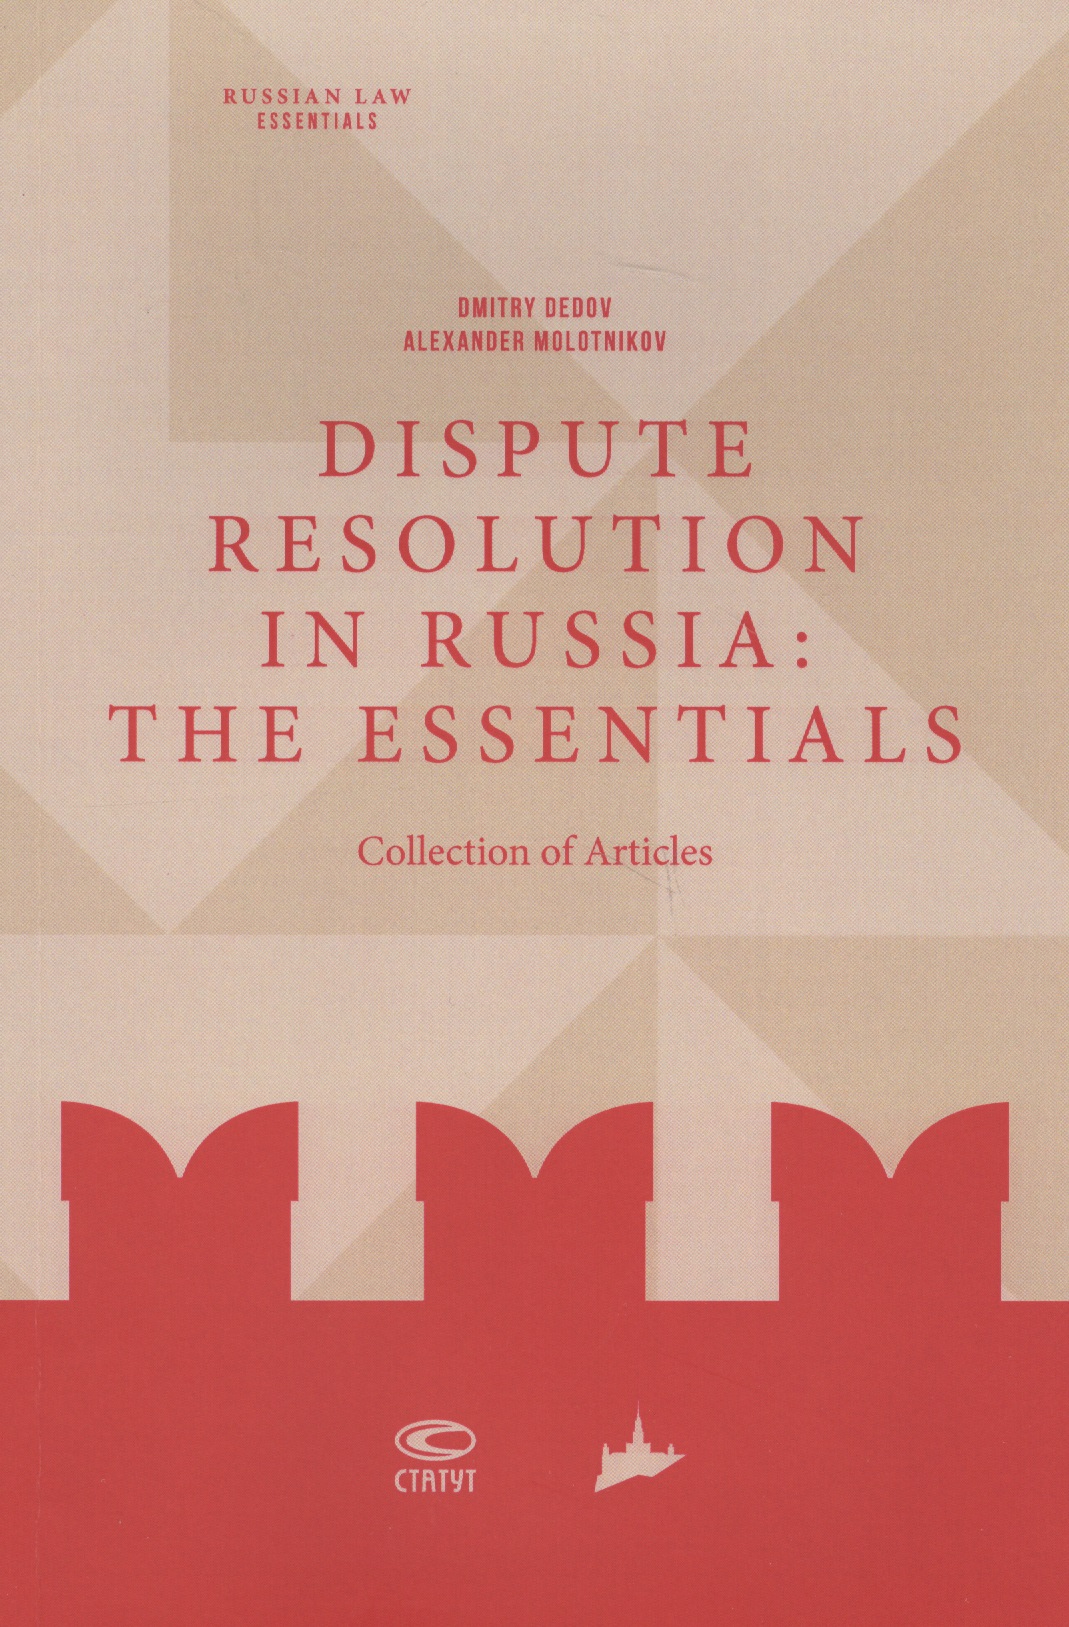 Дедов Дмитрий Иванович Dispute resolution in Russia: the essentials (collection of articles) this link is pay for remote or other shipping fees